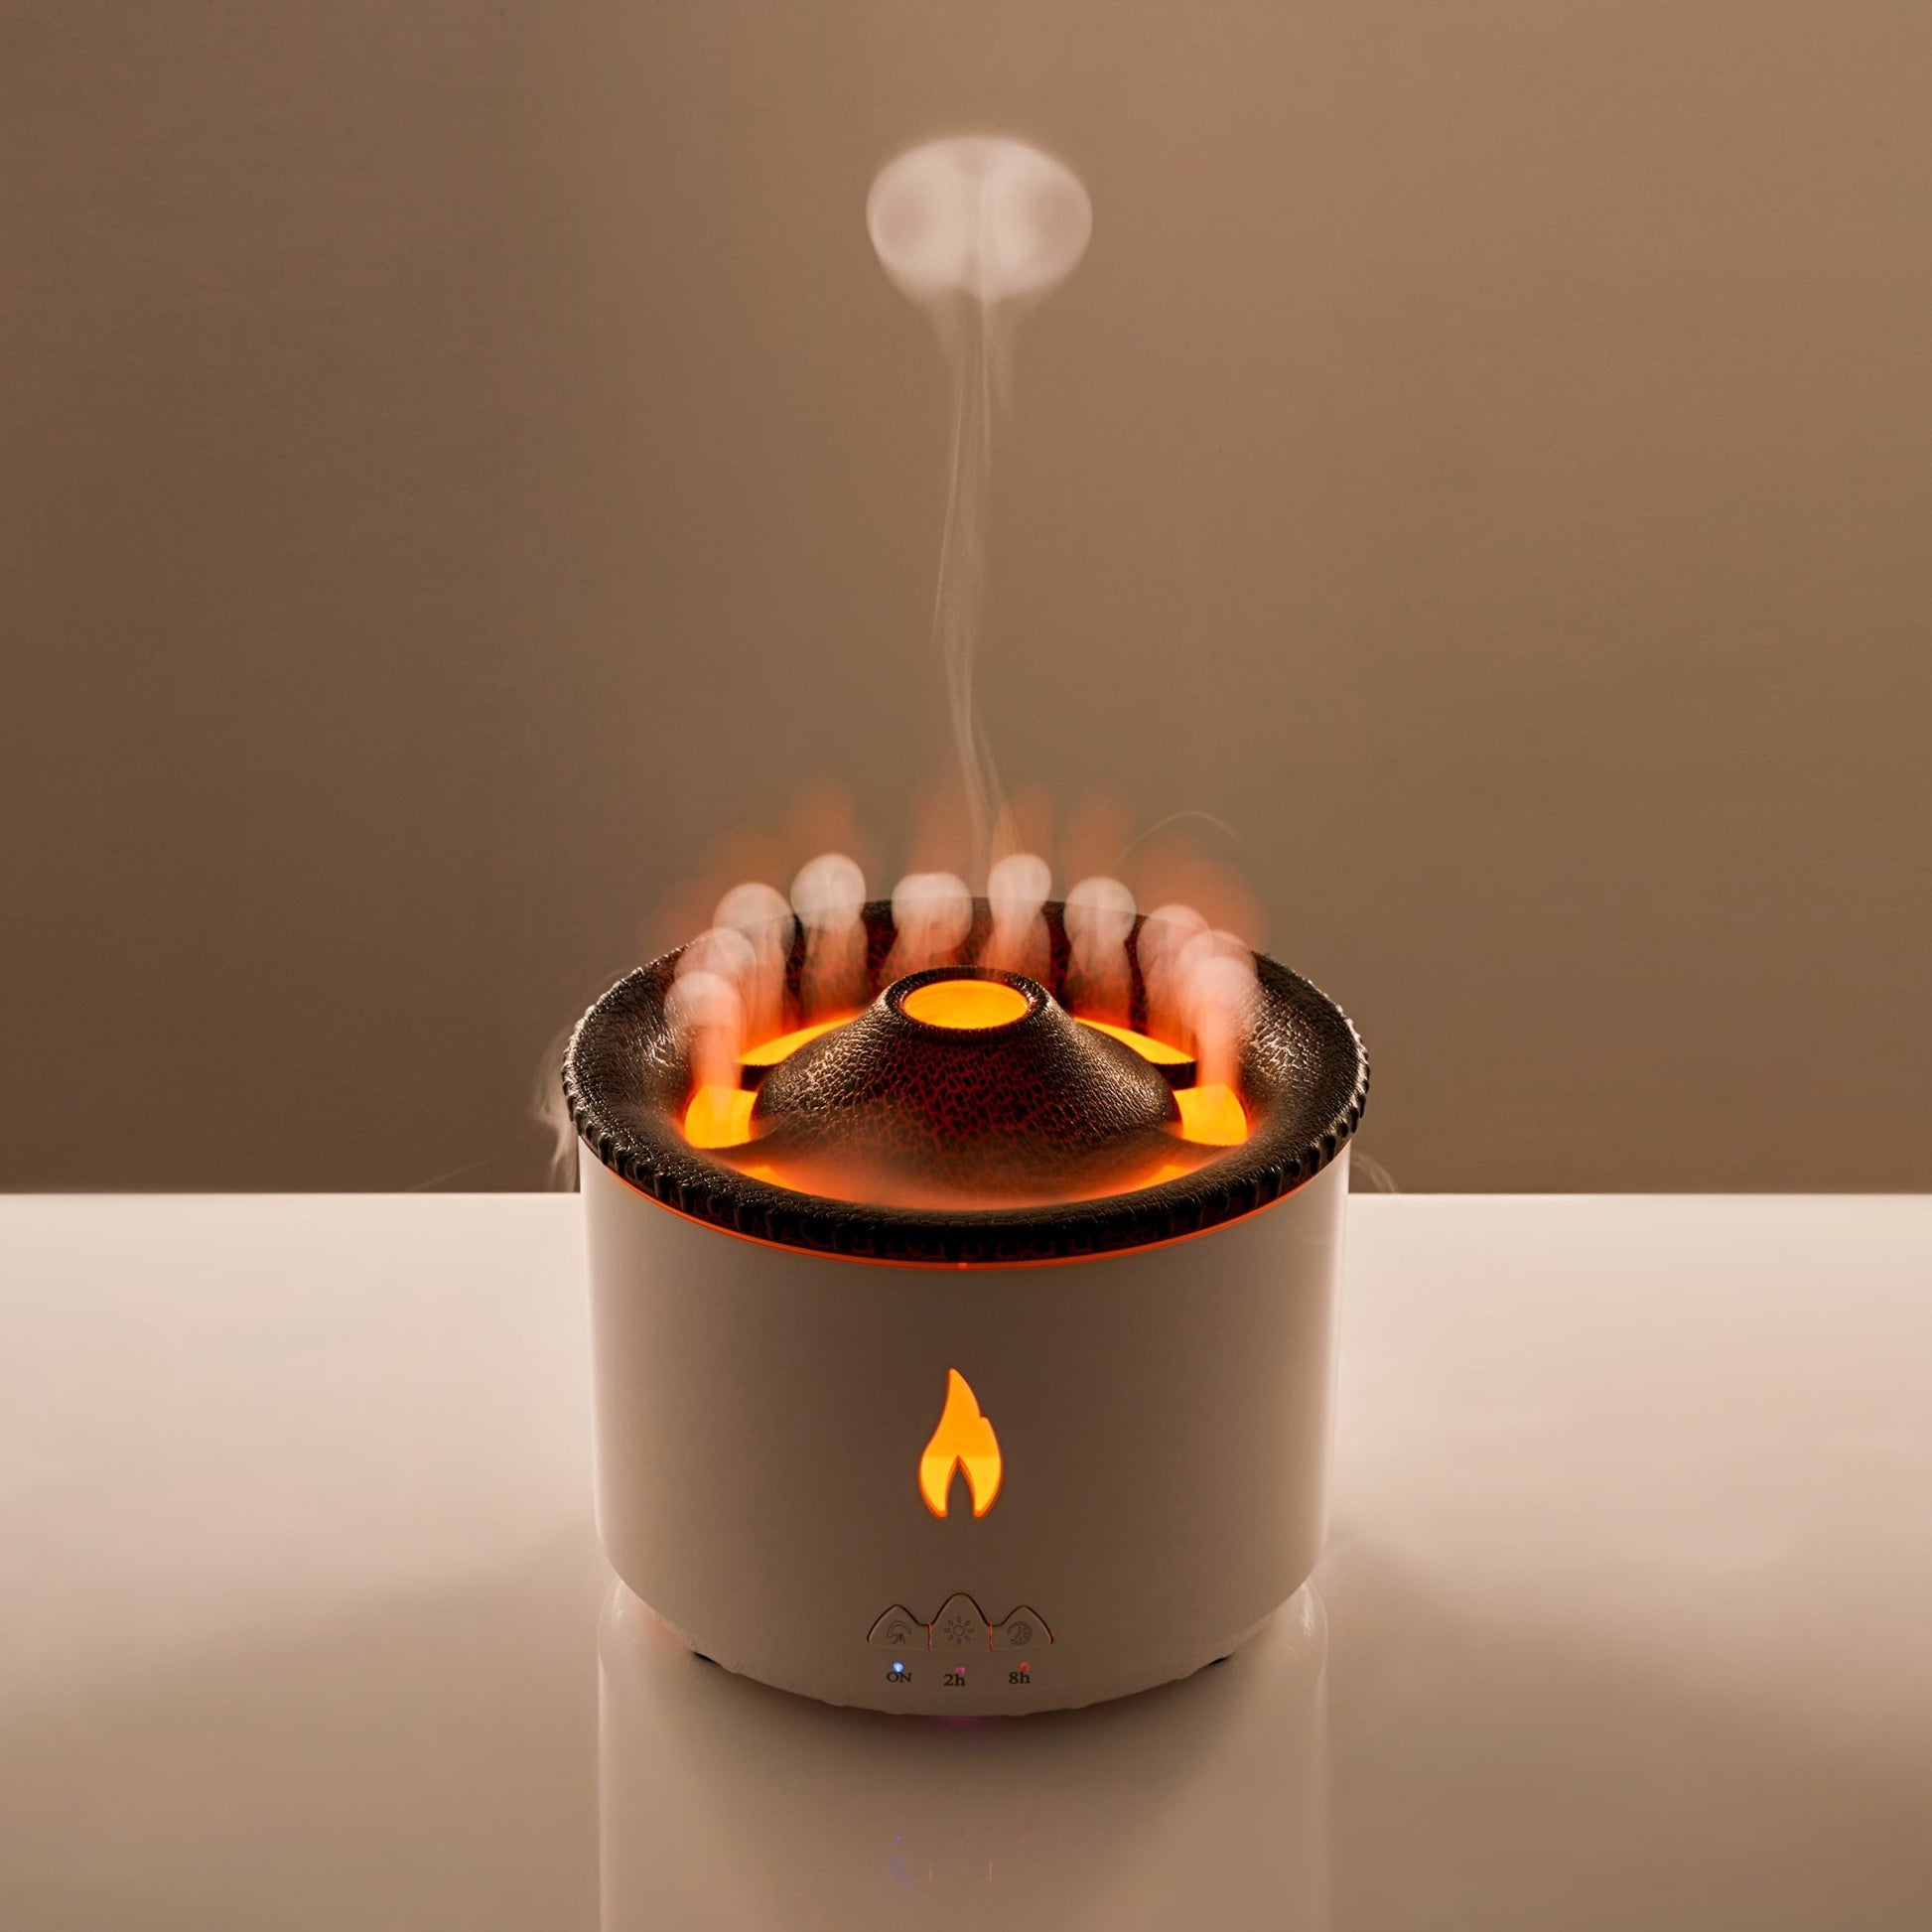 Tory™ Volcano Aroma Diffuser - It's on Tory